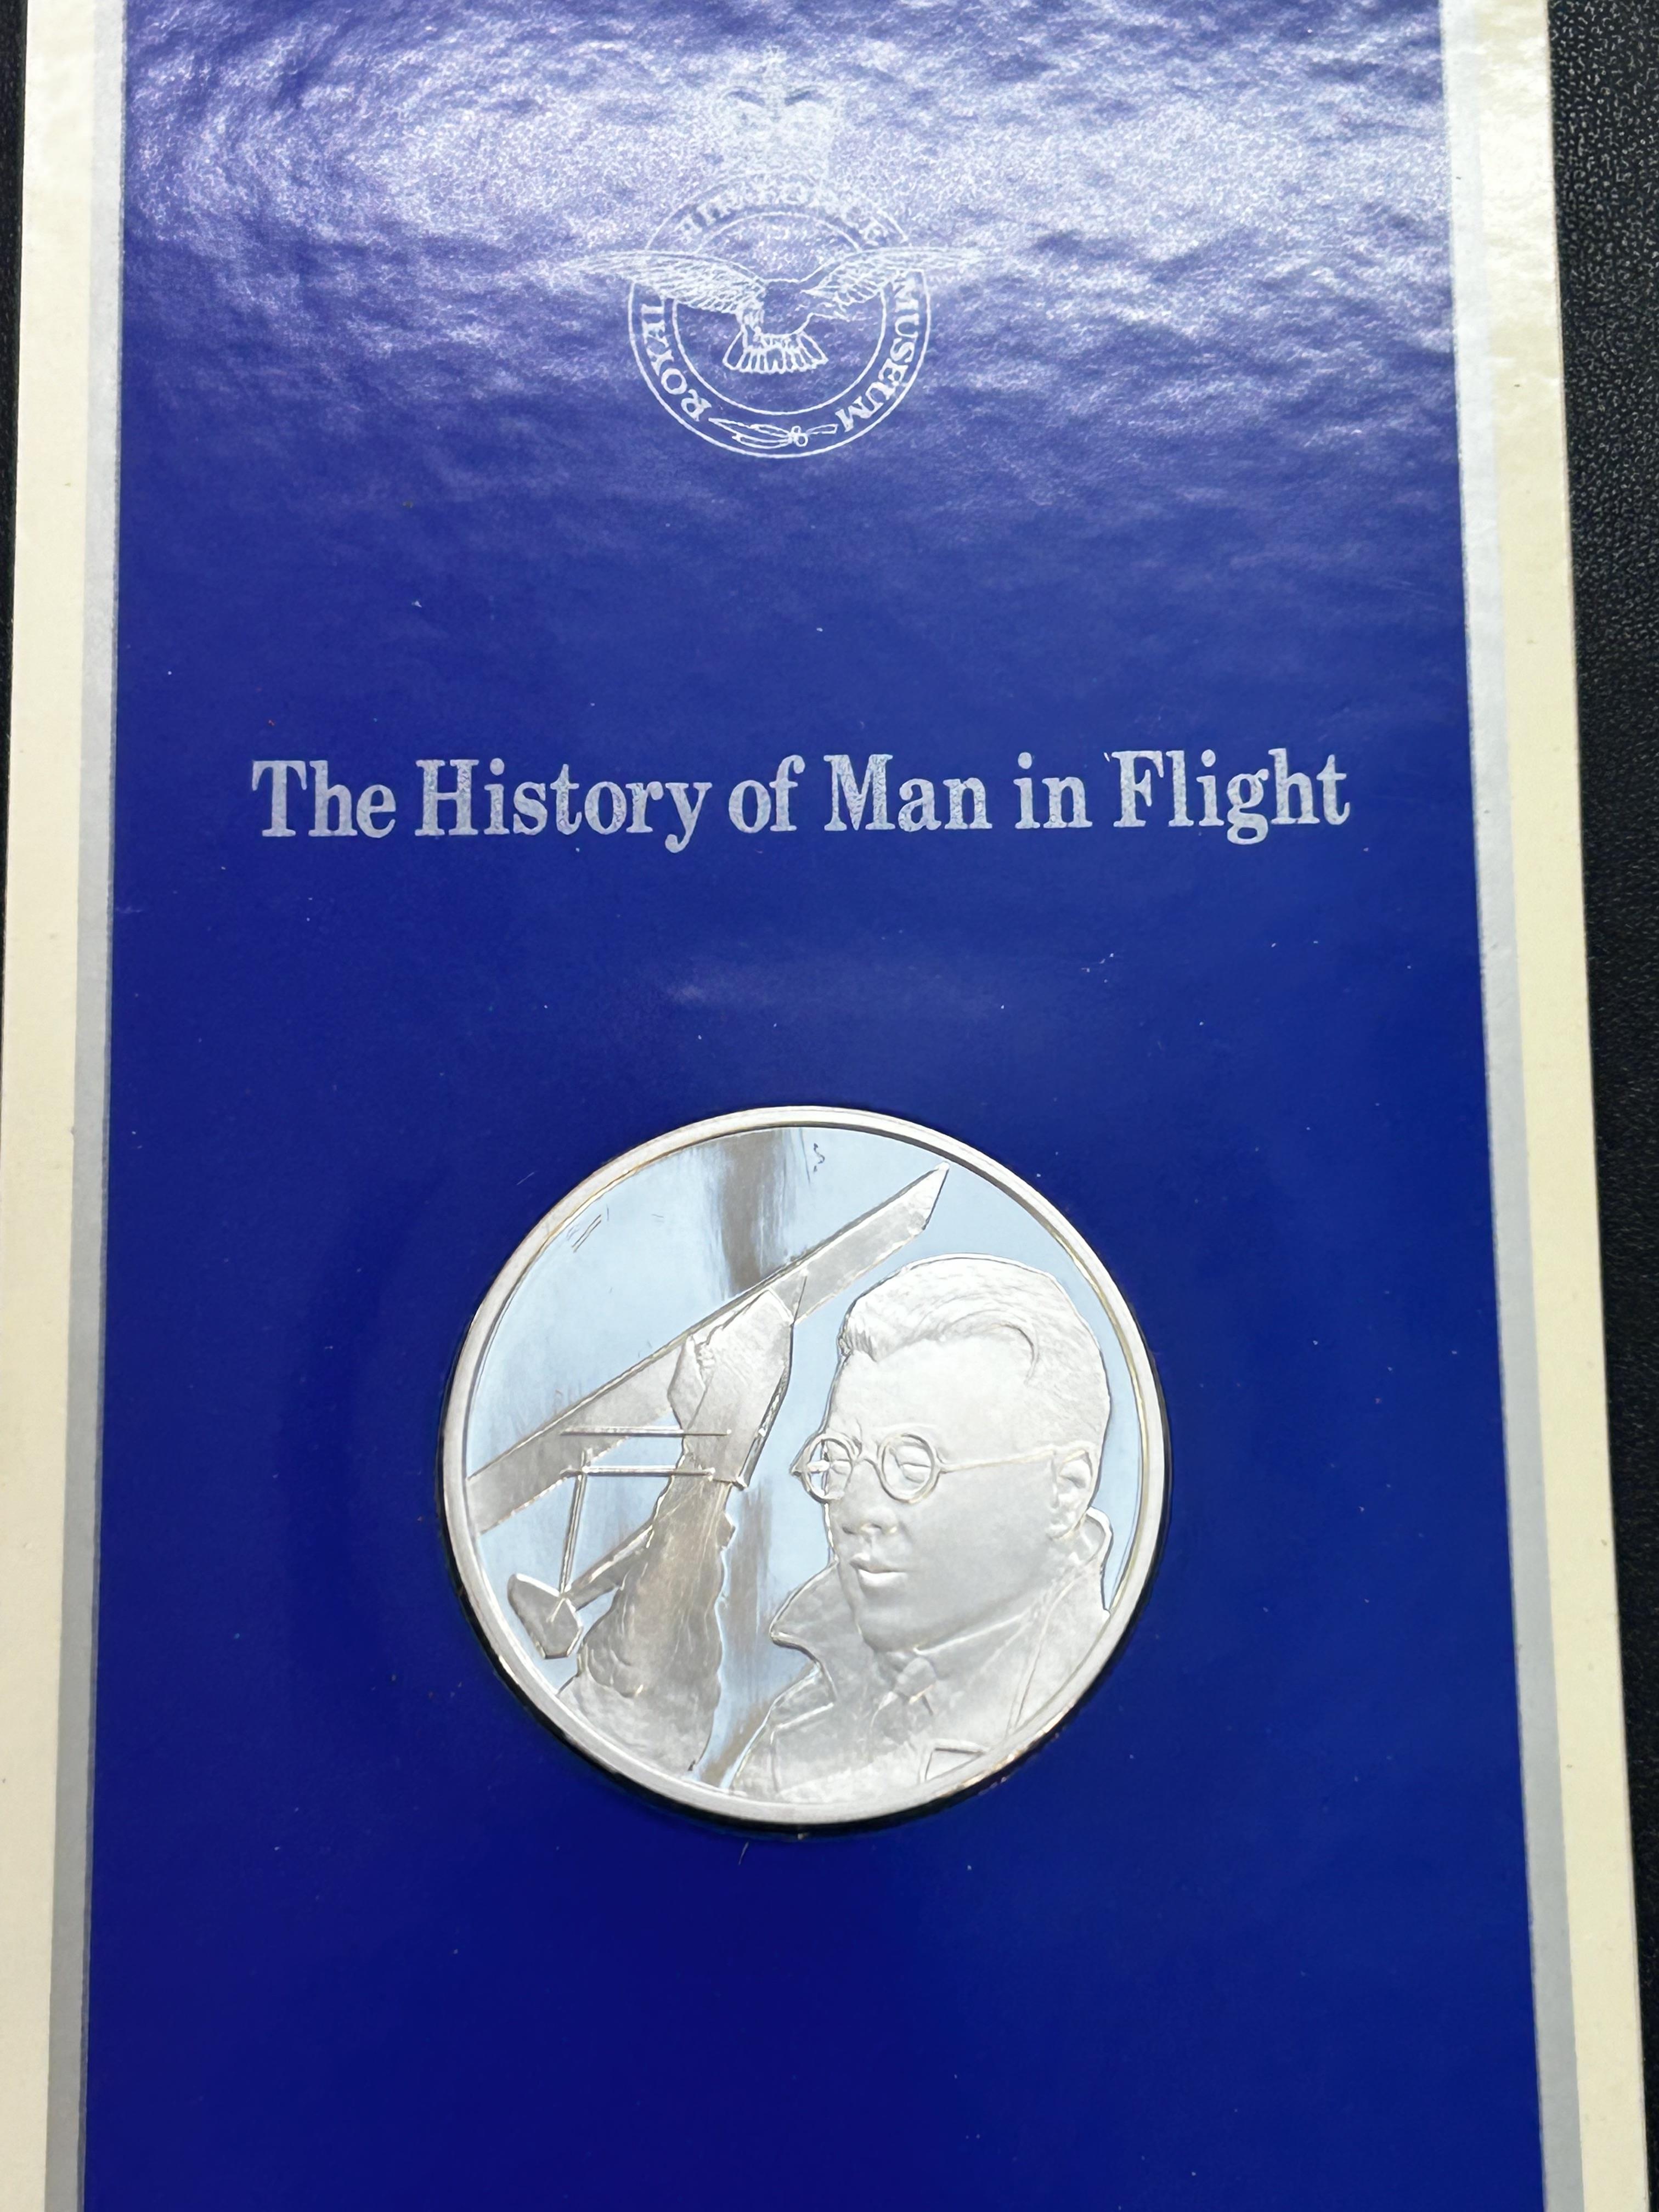 The history of man in flight Dr Fritz von opal 1st